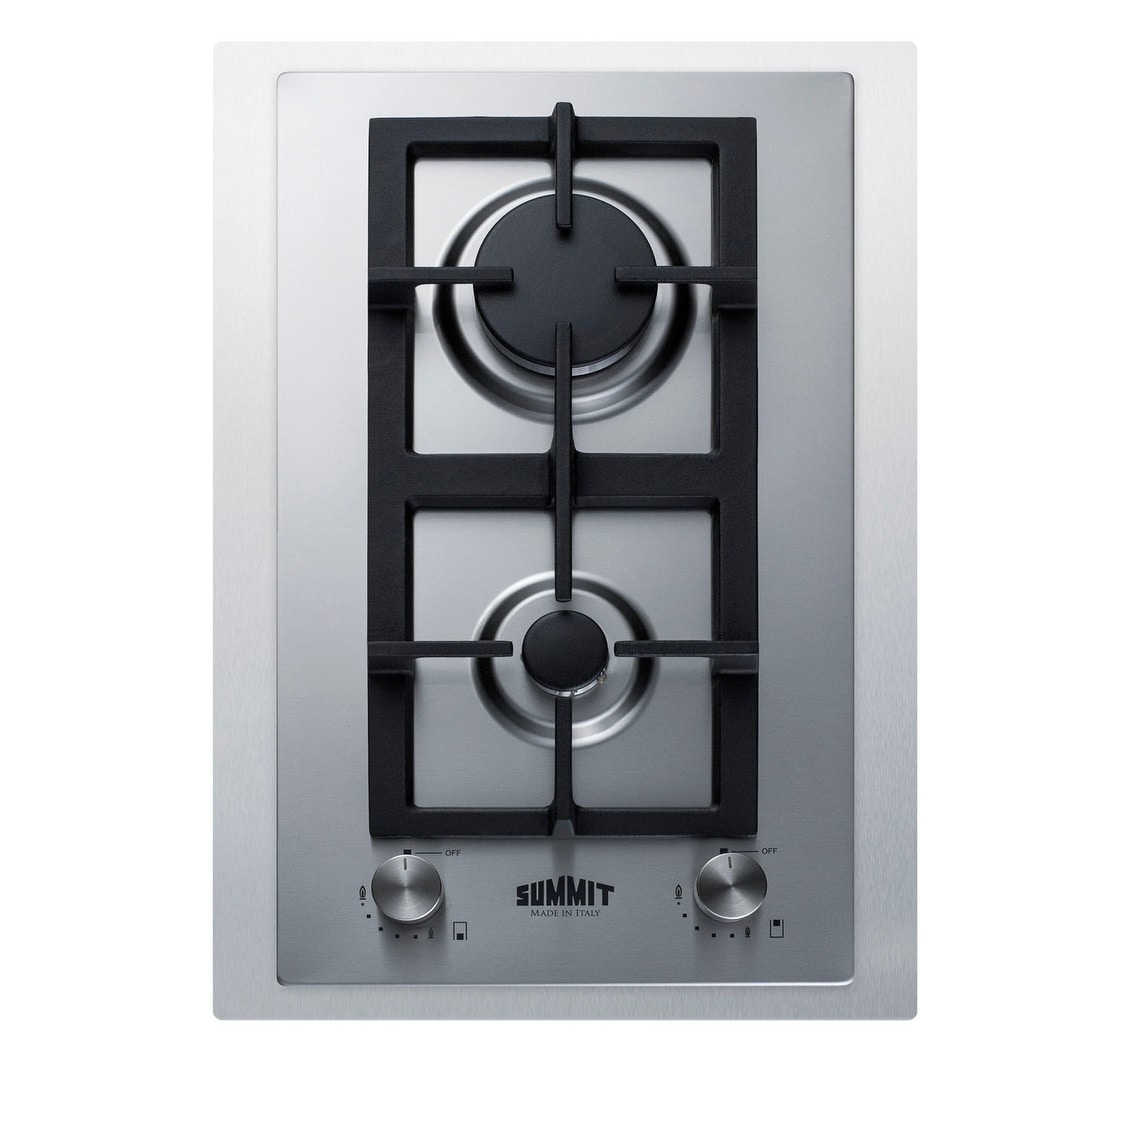 Summit GCJ2TK15 15" Wide 2 Burner Gas Cooktop with Designer Knobs and - Stainless Steel